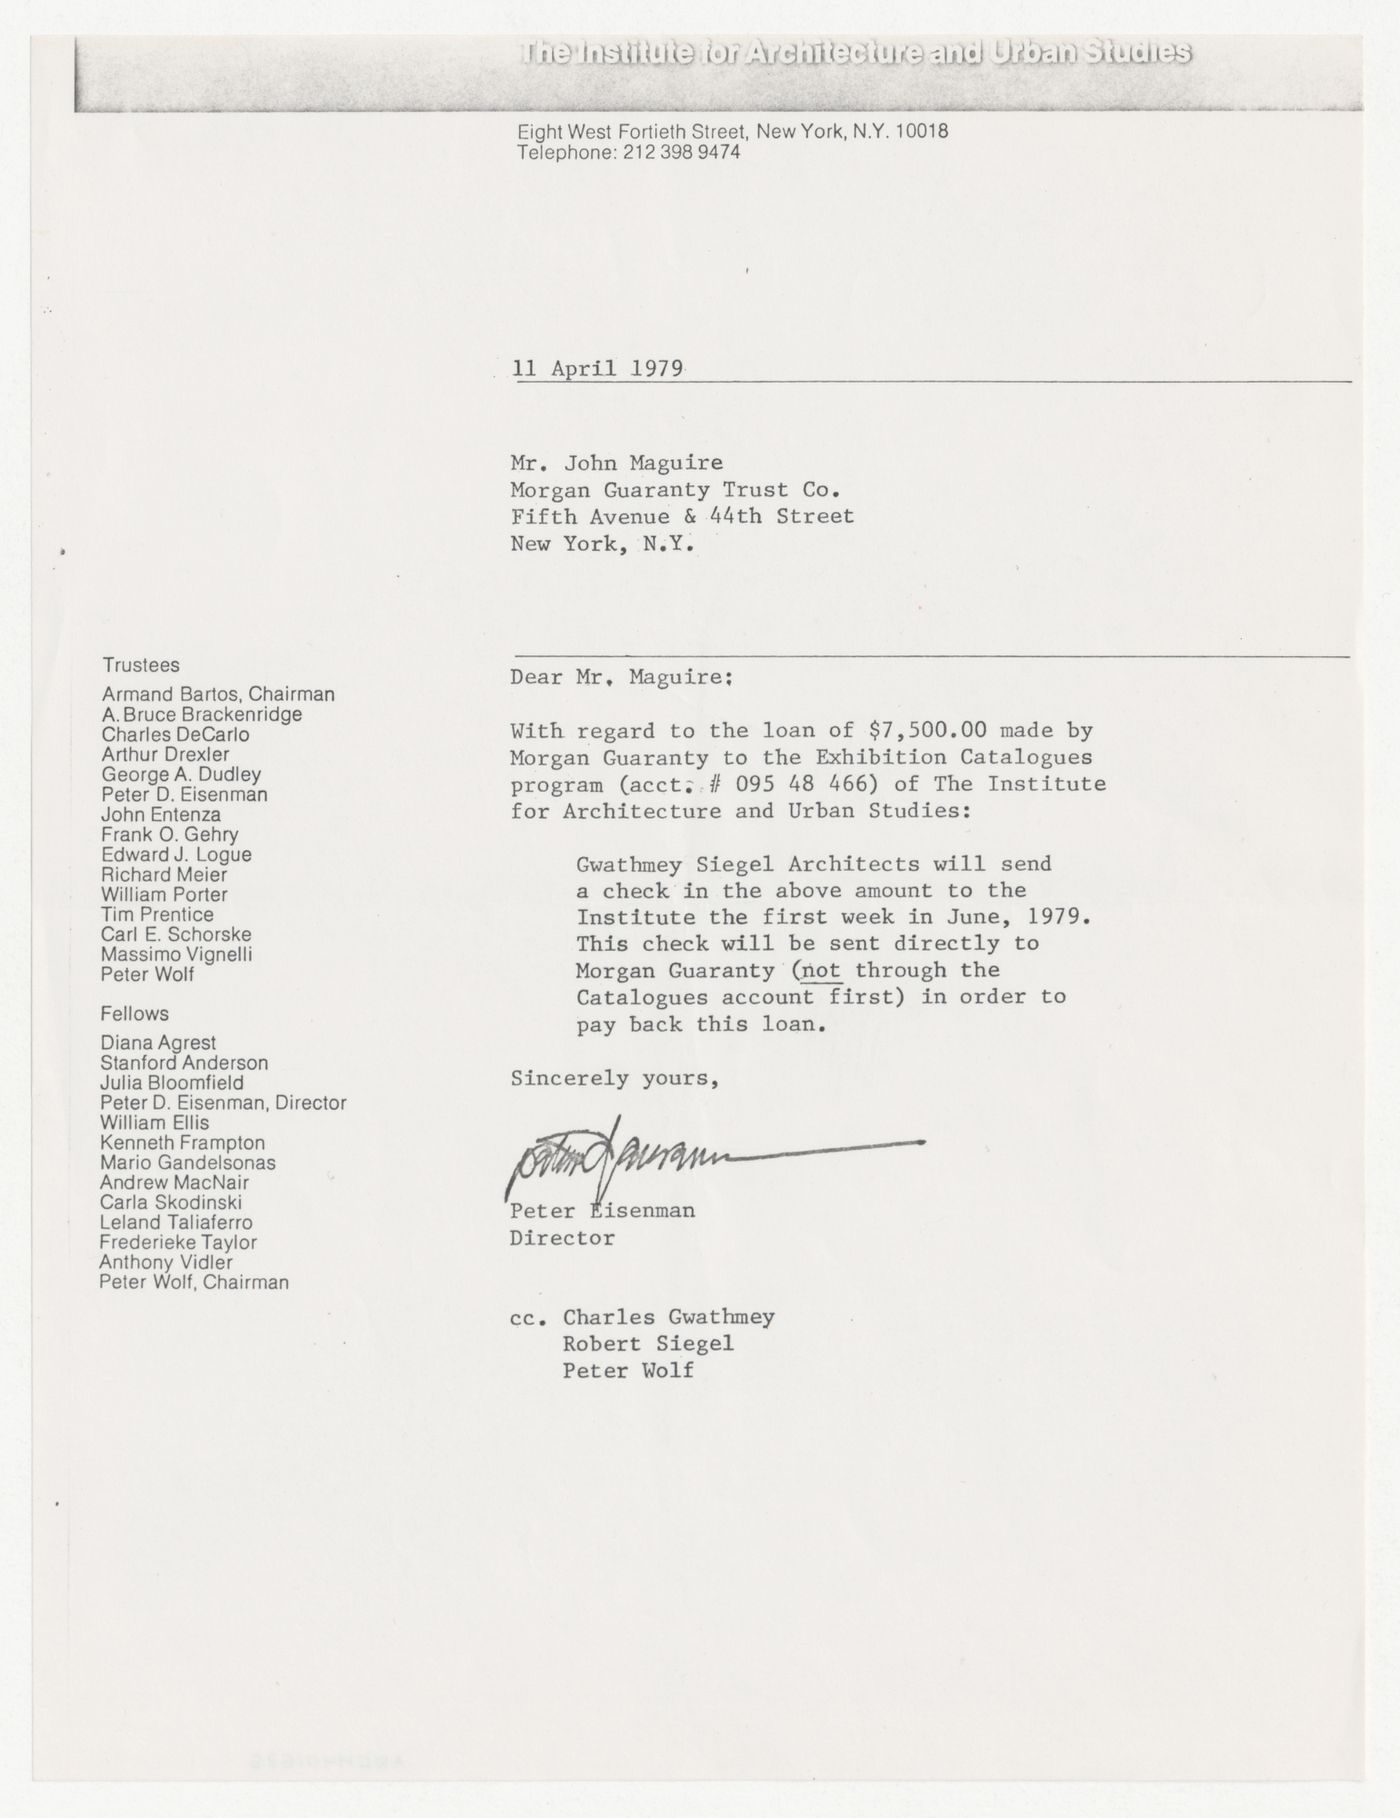 Letter from Peter D. Eisenman to John Maguire about repayment of loan to the Exhibition Catalogues program